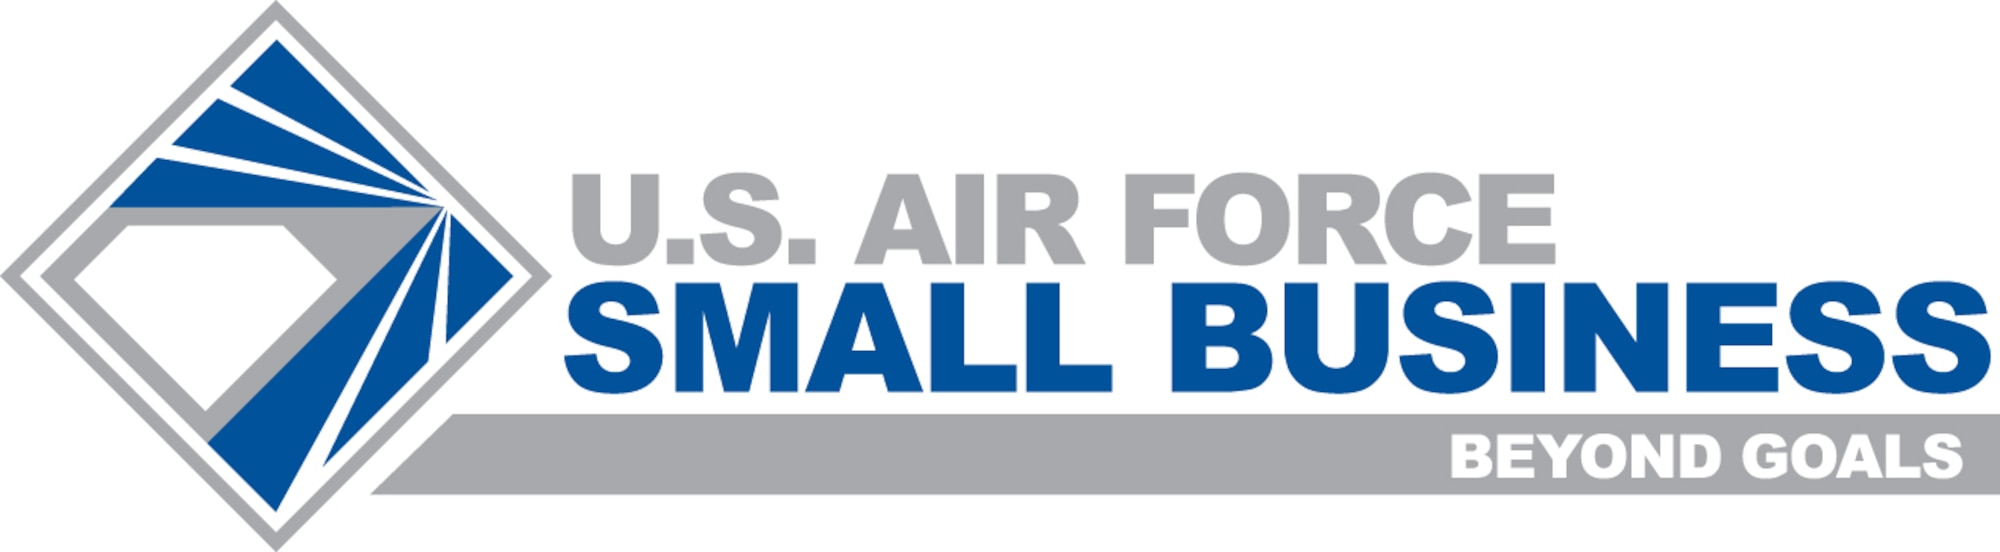 Air Force Small Business Logo